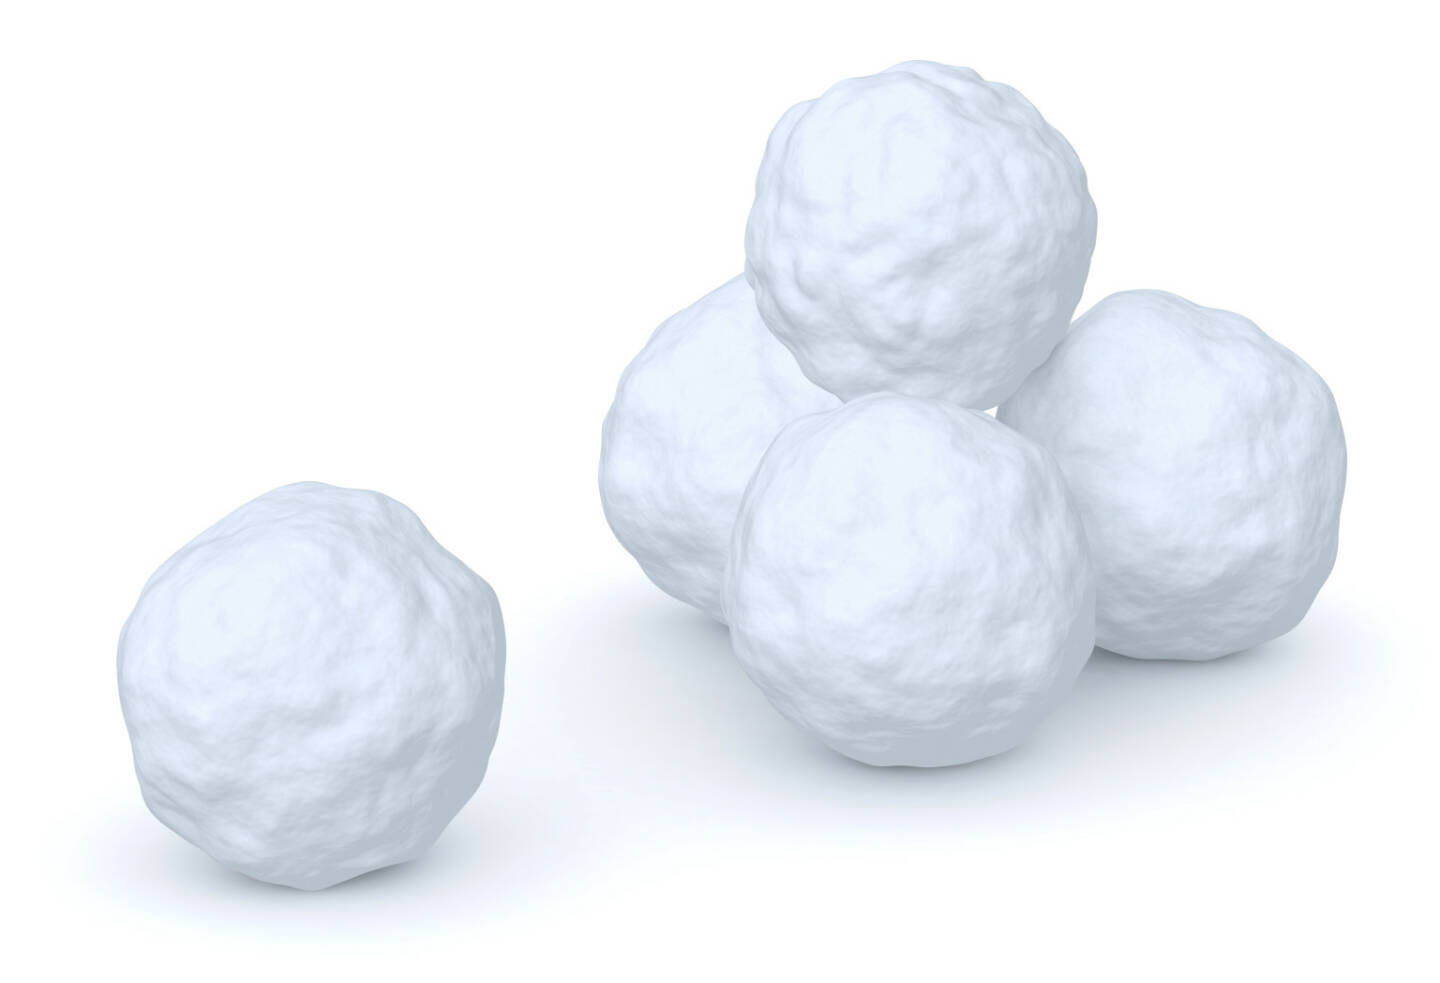 Schneeball, Schneebälle, Haufen http://www.shutterstock.com/de/pic-226913161/stock-photo-snowballs-heap-and-one-snowball-isolated-on-white-background.html